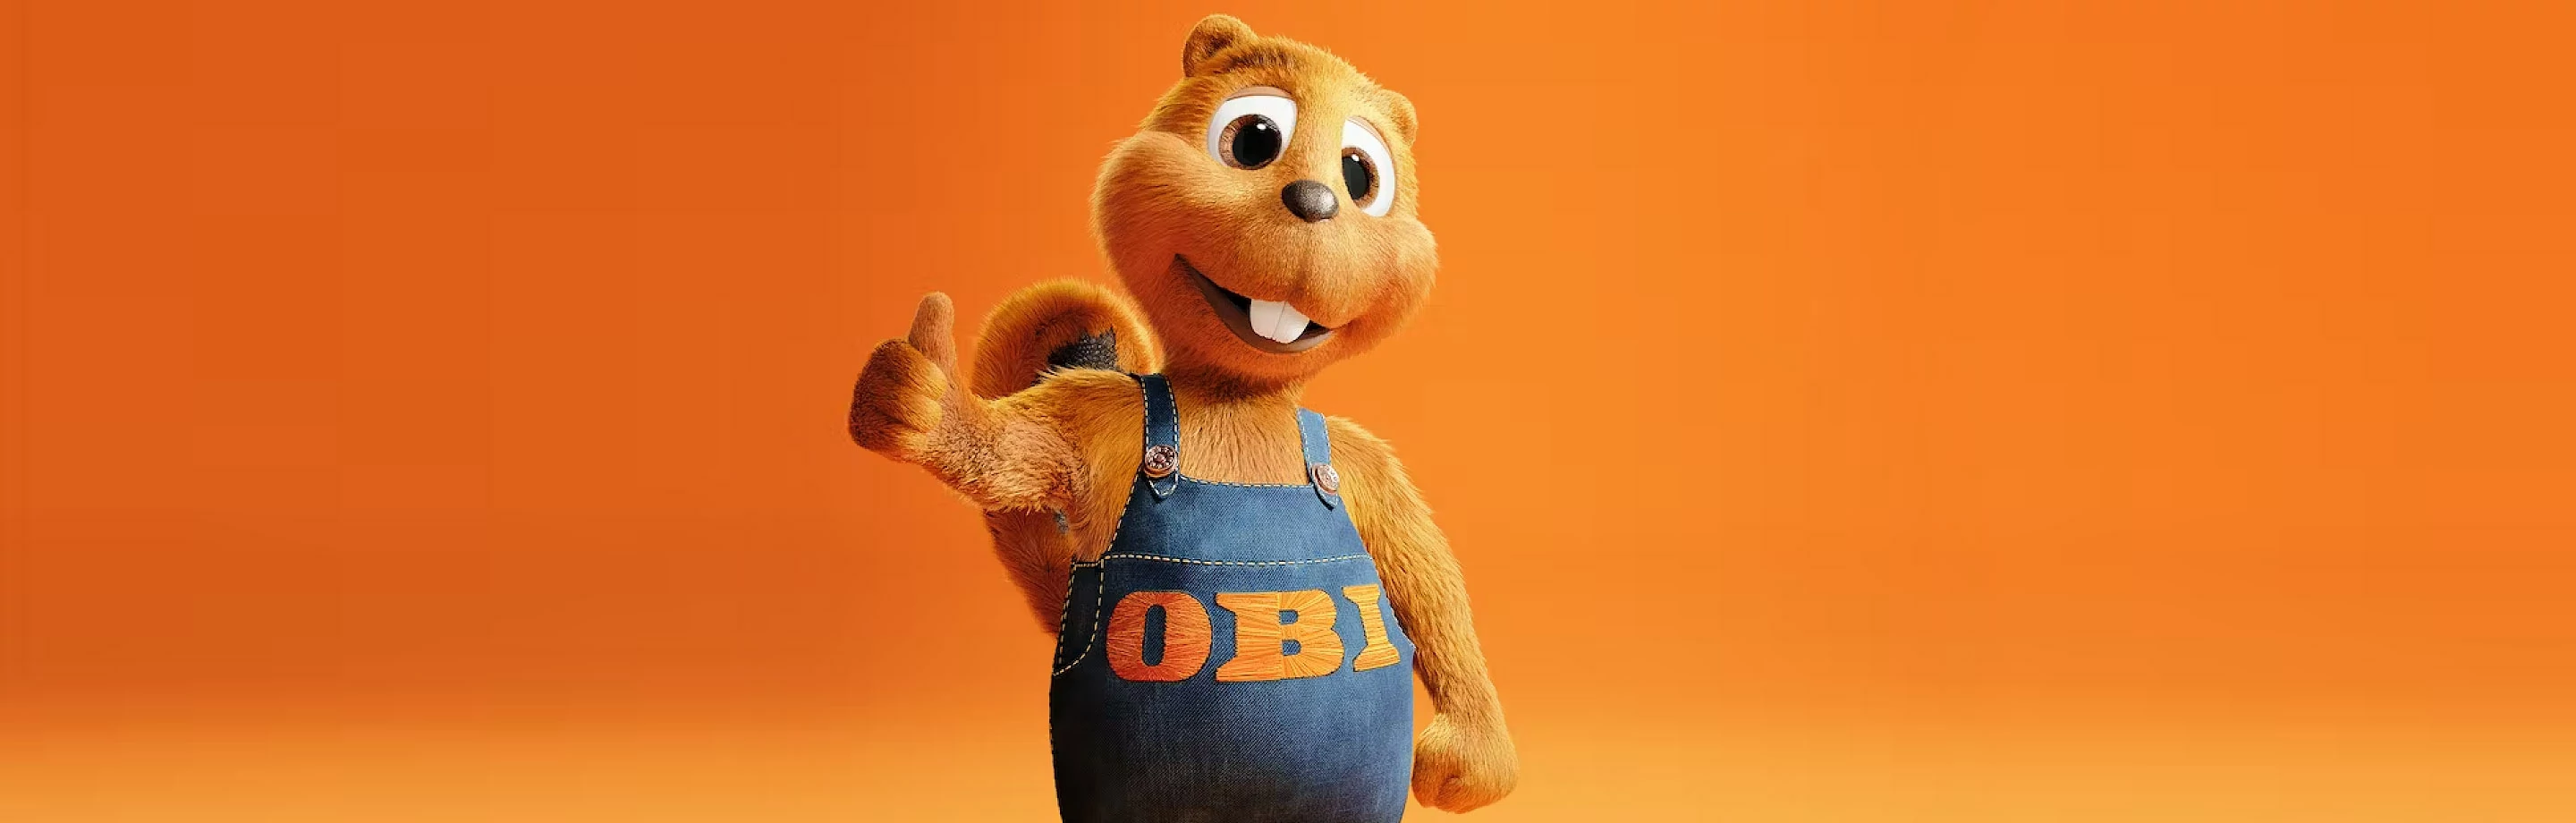 The smiling OBI beaver in blue workman's overalls with his thumb up in front of a monochrome orange background